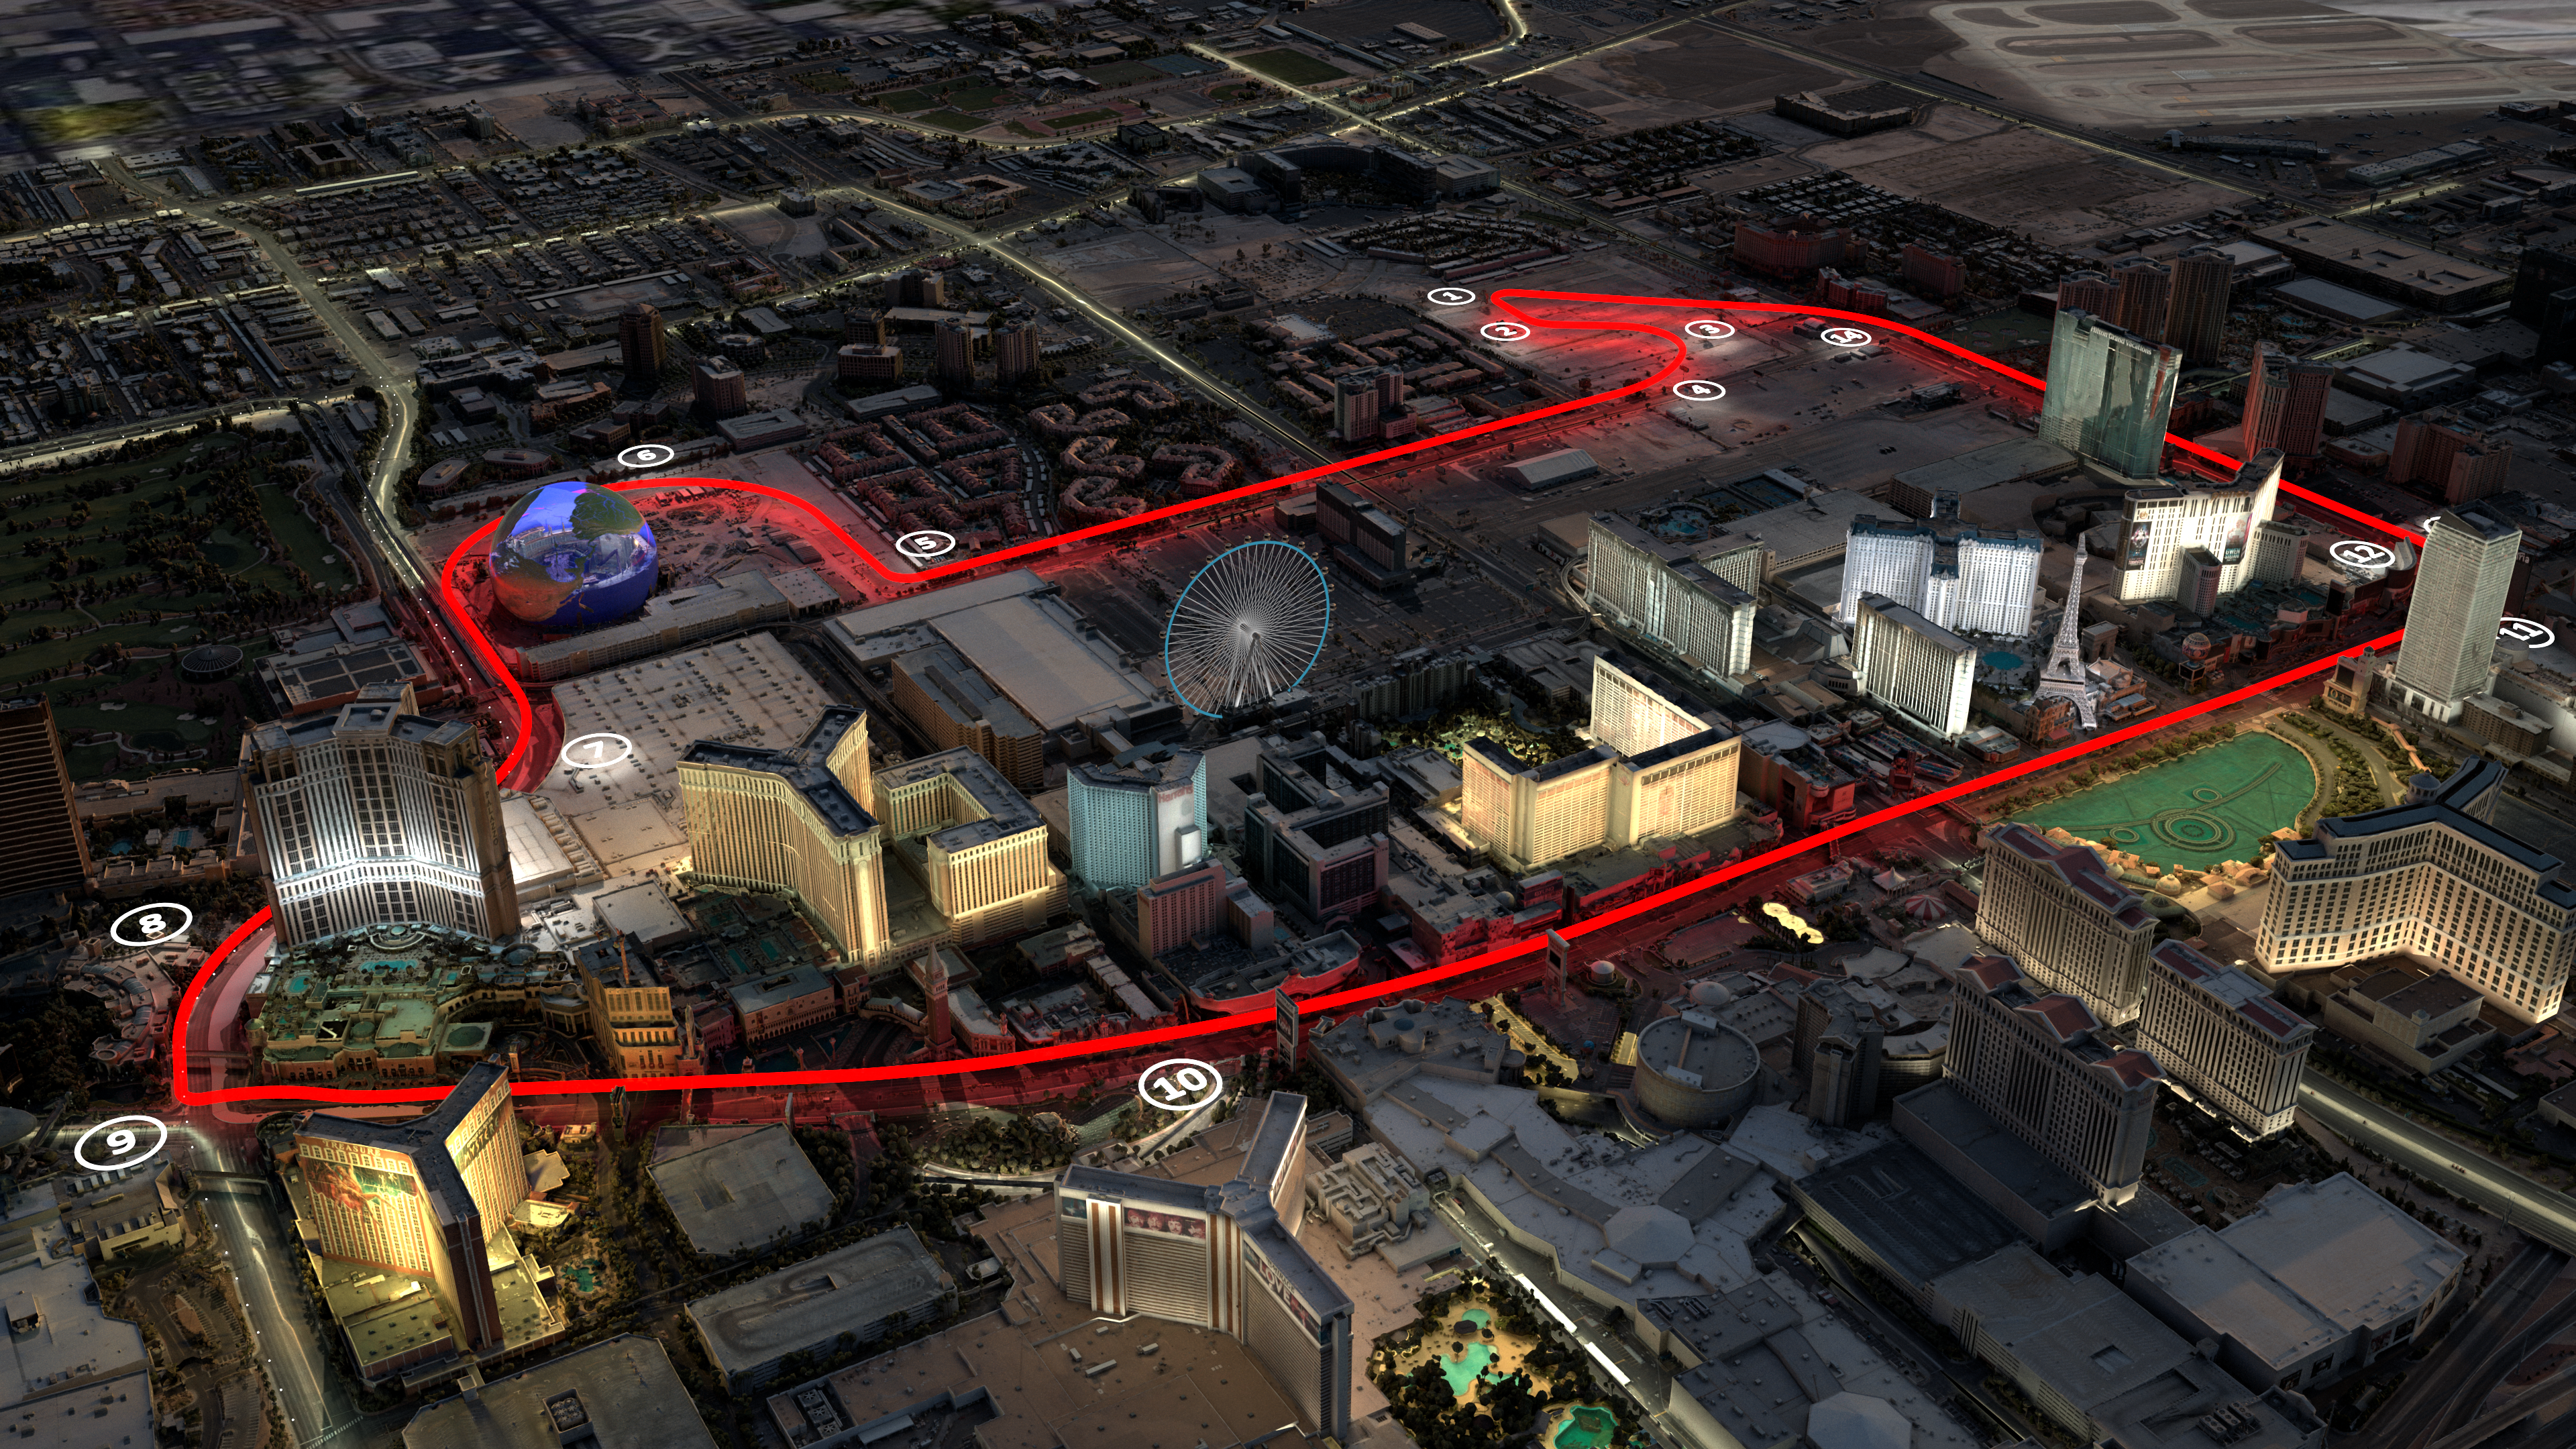 The track features a long back straight down the strip past Ceasars Palace and the Bellagio, right